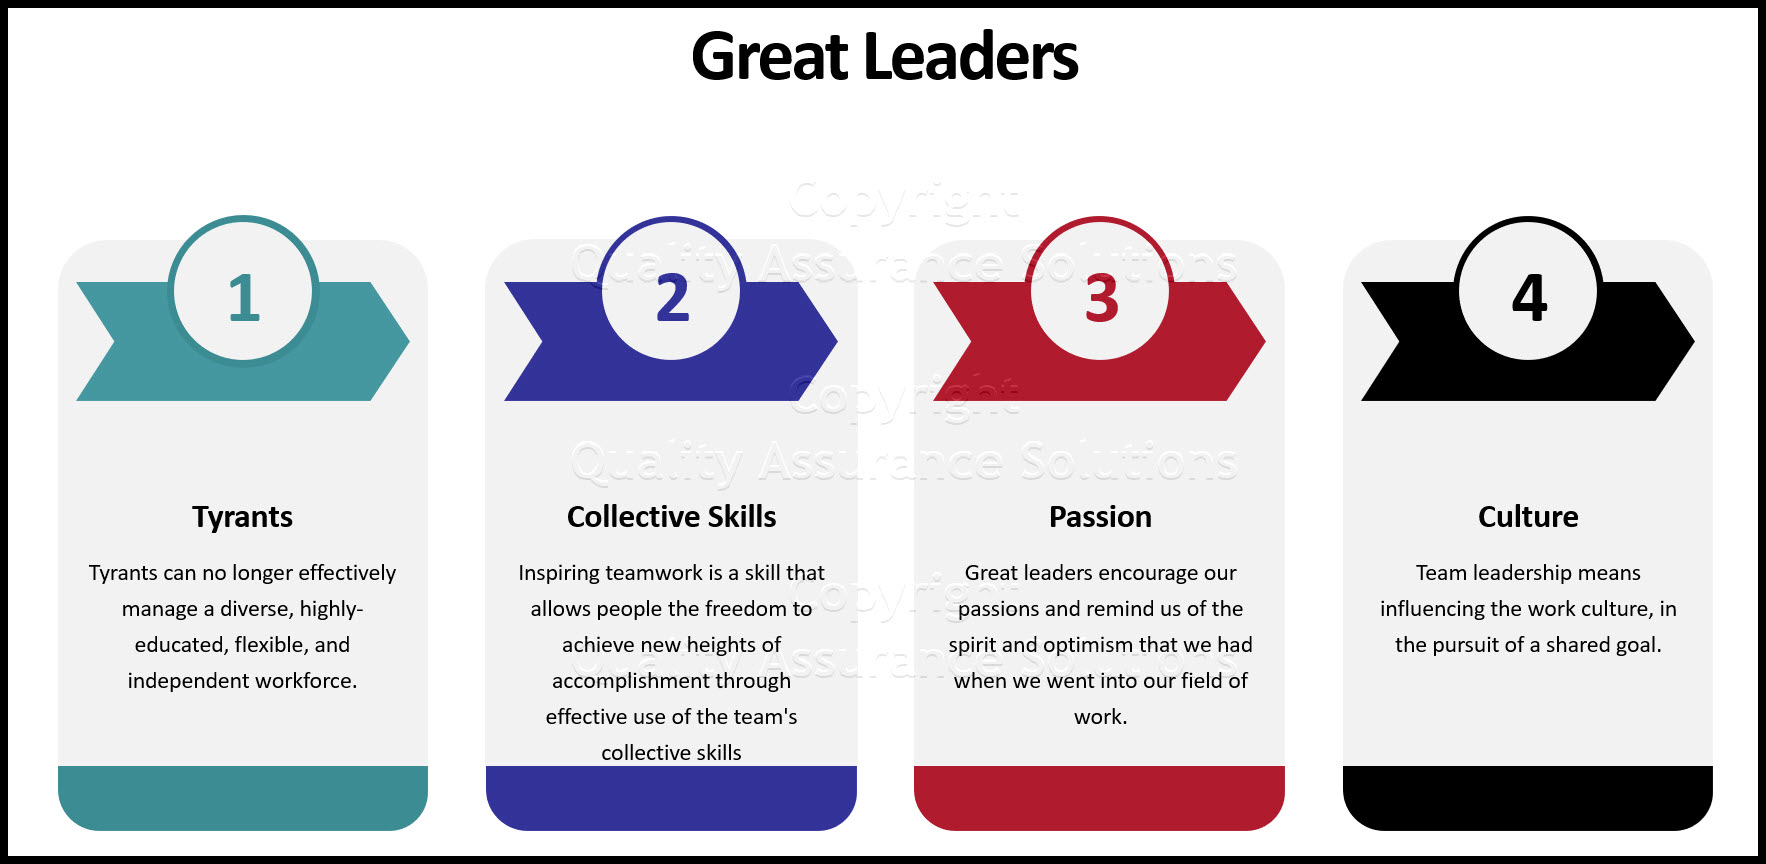 Team leadership...how to make a seamless transition from team player to team leader